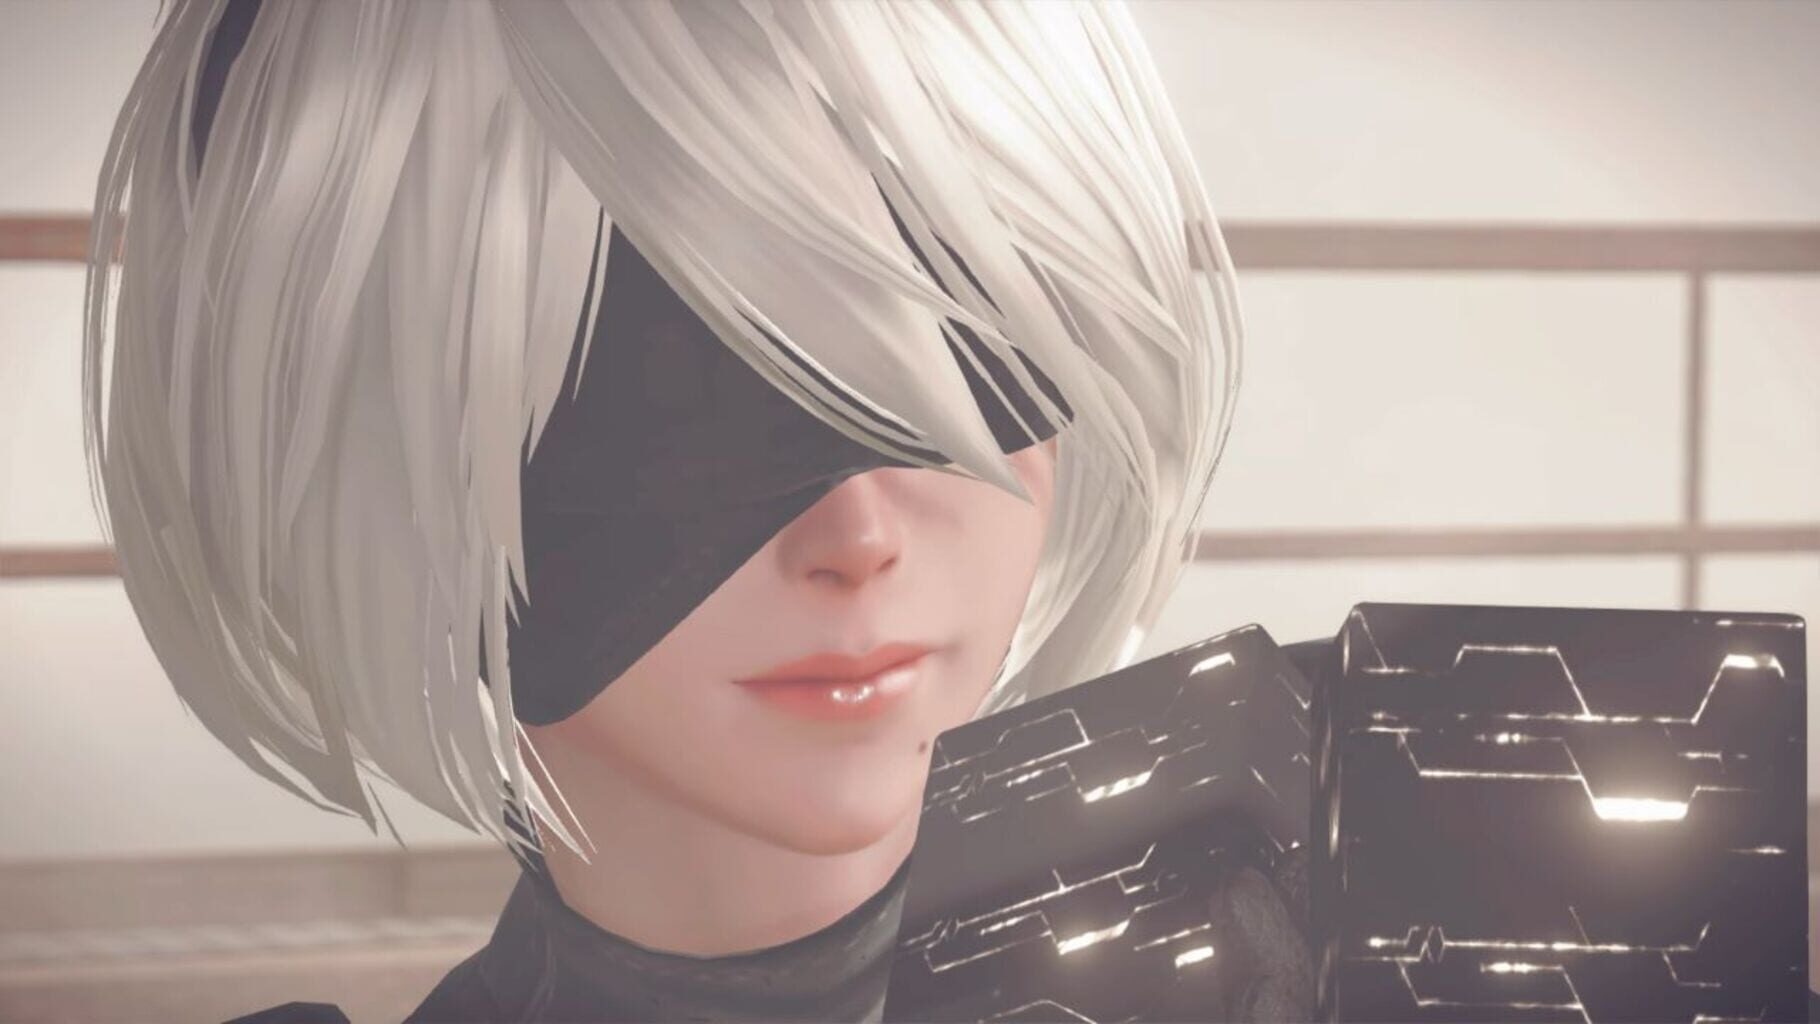 NieR: Automata - The End of the YoRHa Edition